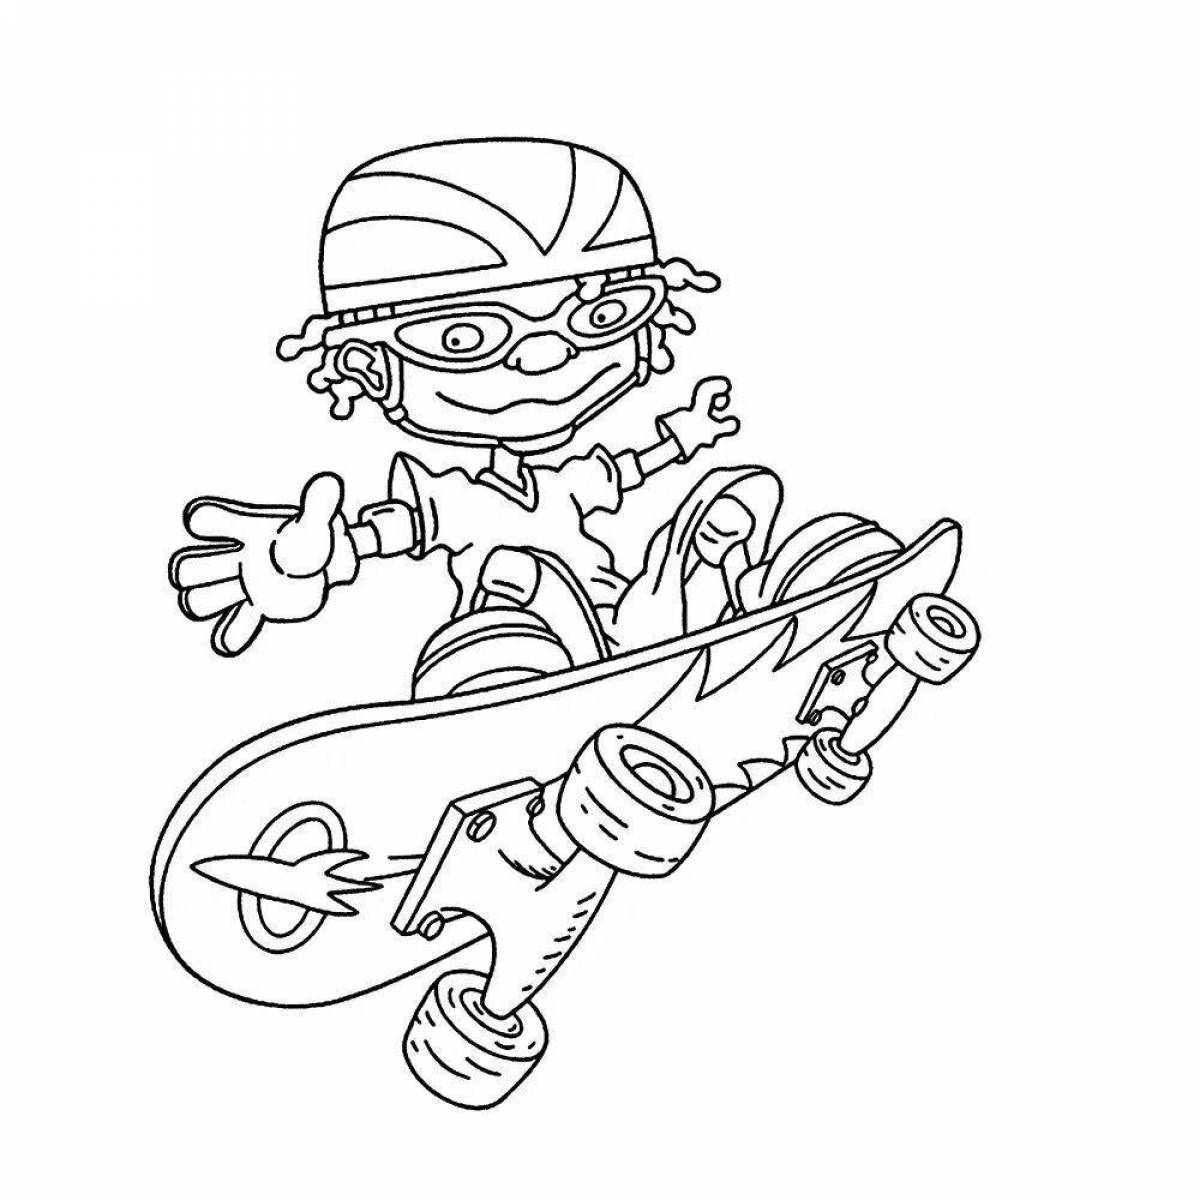 Coloring page fearless skateboarder